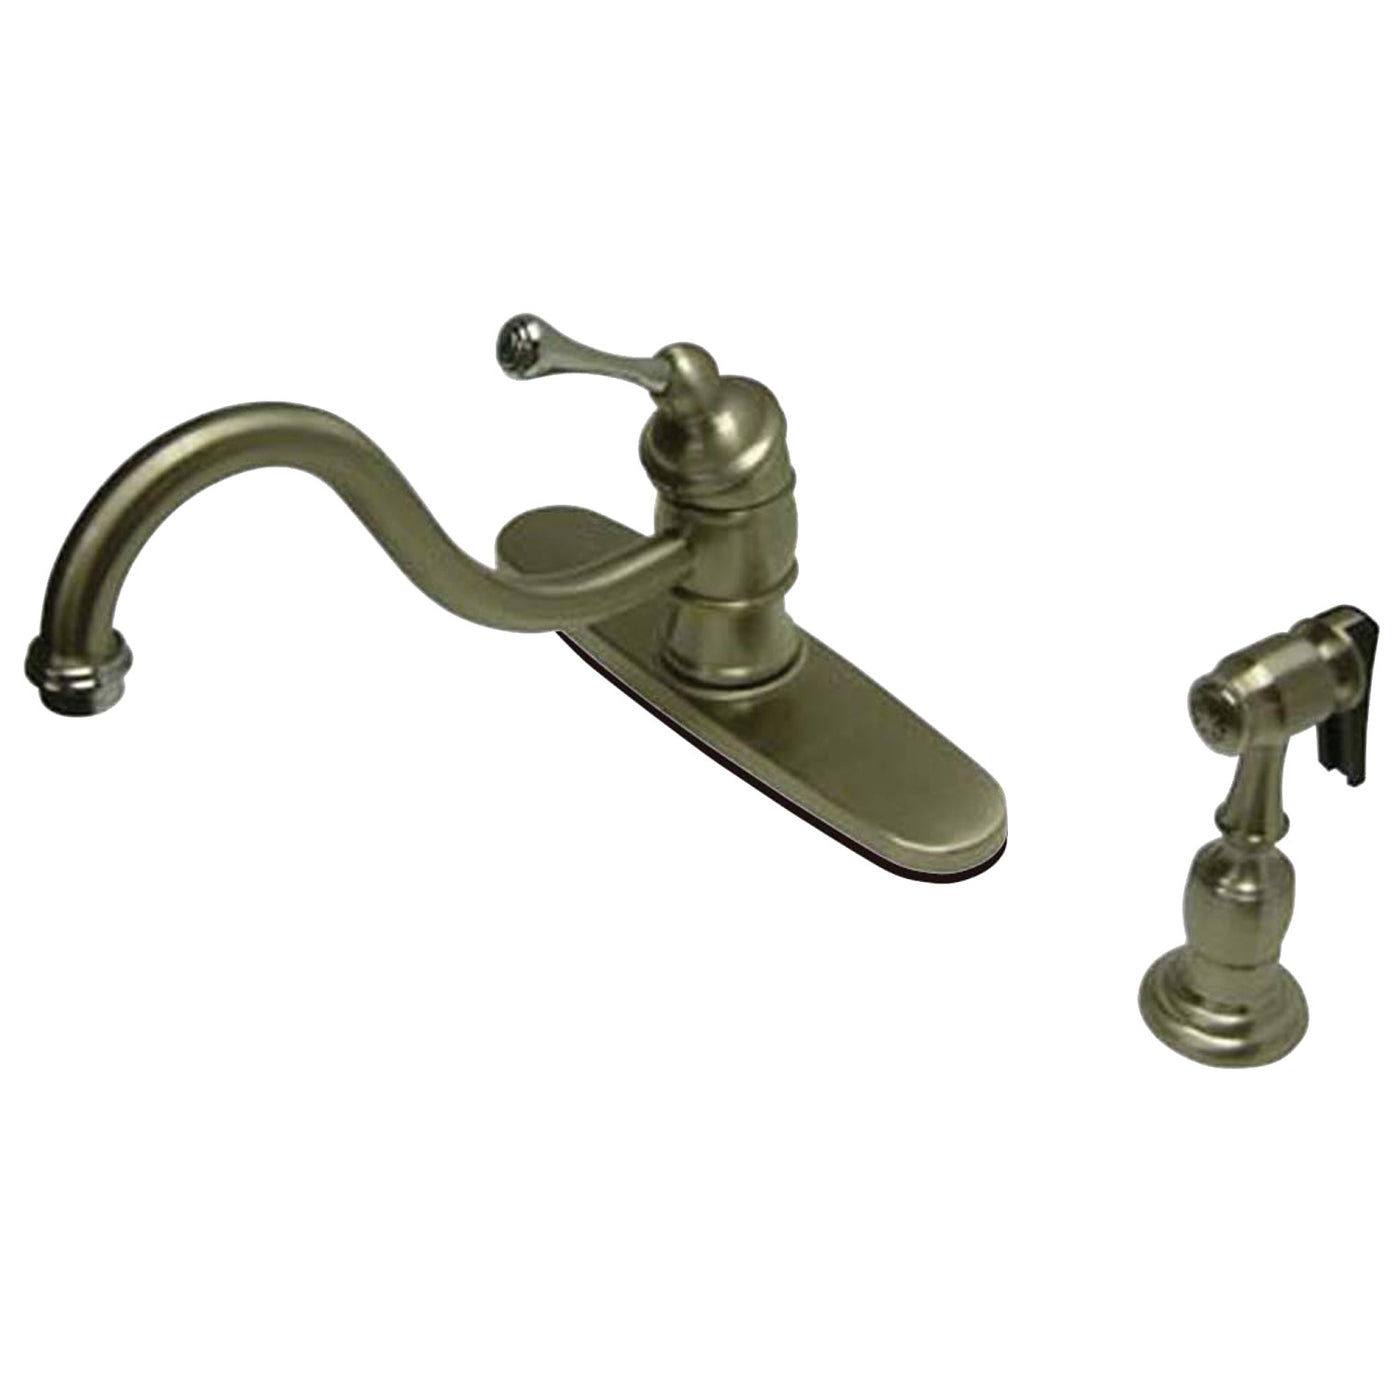 Elements of Design EB3577BLBS Single-Handle Kitchen Faucet with Brass Sprayer, Brushed Nickel/Polished Chrome